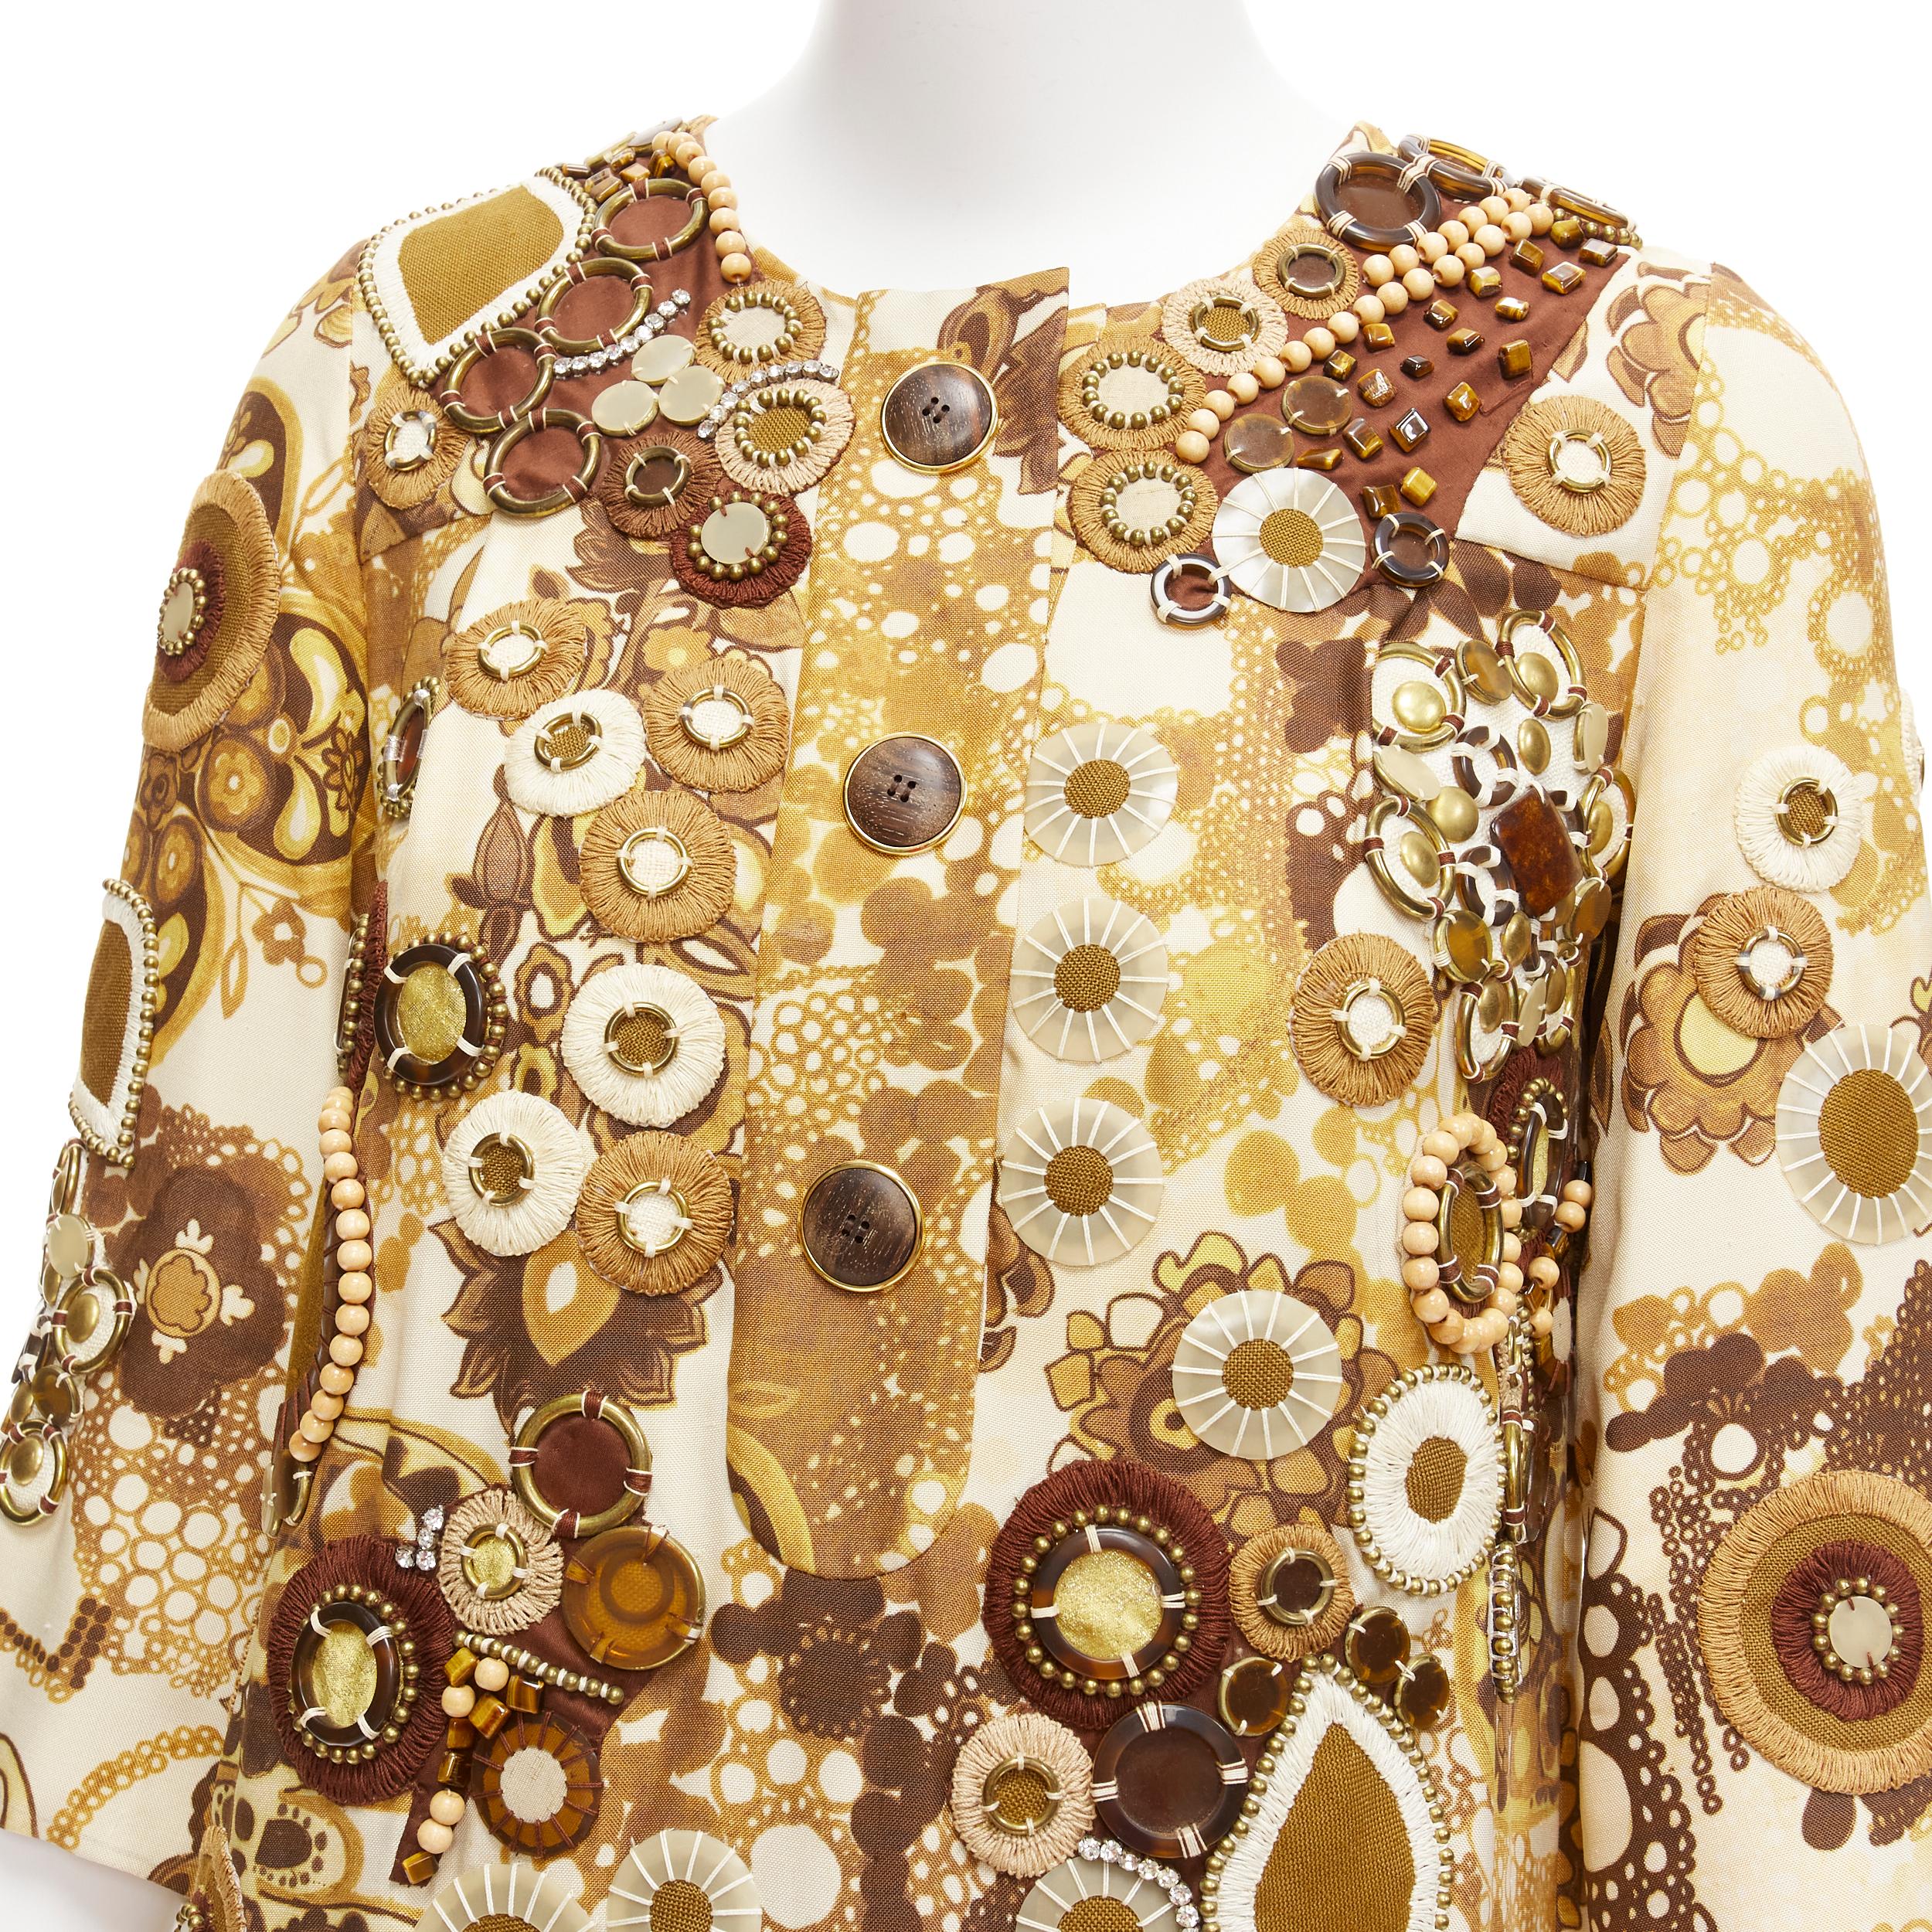 rare CHLOE 2007 Runway Phoebe Philo Ficelle brown floral embellished shift dress FR34 XS
Reference: CC/A00396
Brand: Chloe
Designer: Phoebe Philo
Collection: 2007 SS - Runway
Material: Silk
Color: Brown, Beige
Pattern: Floral
Closure: Button
Lining: